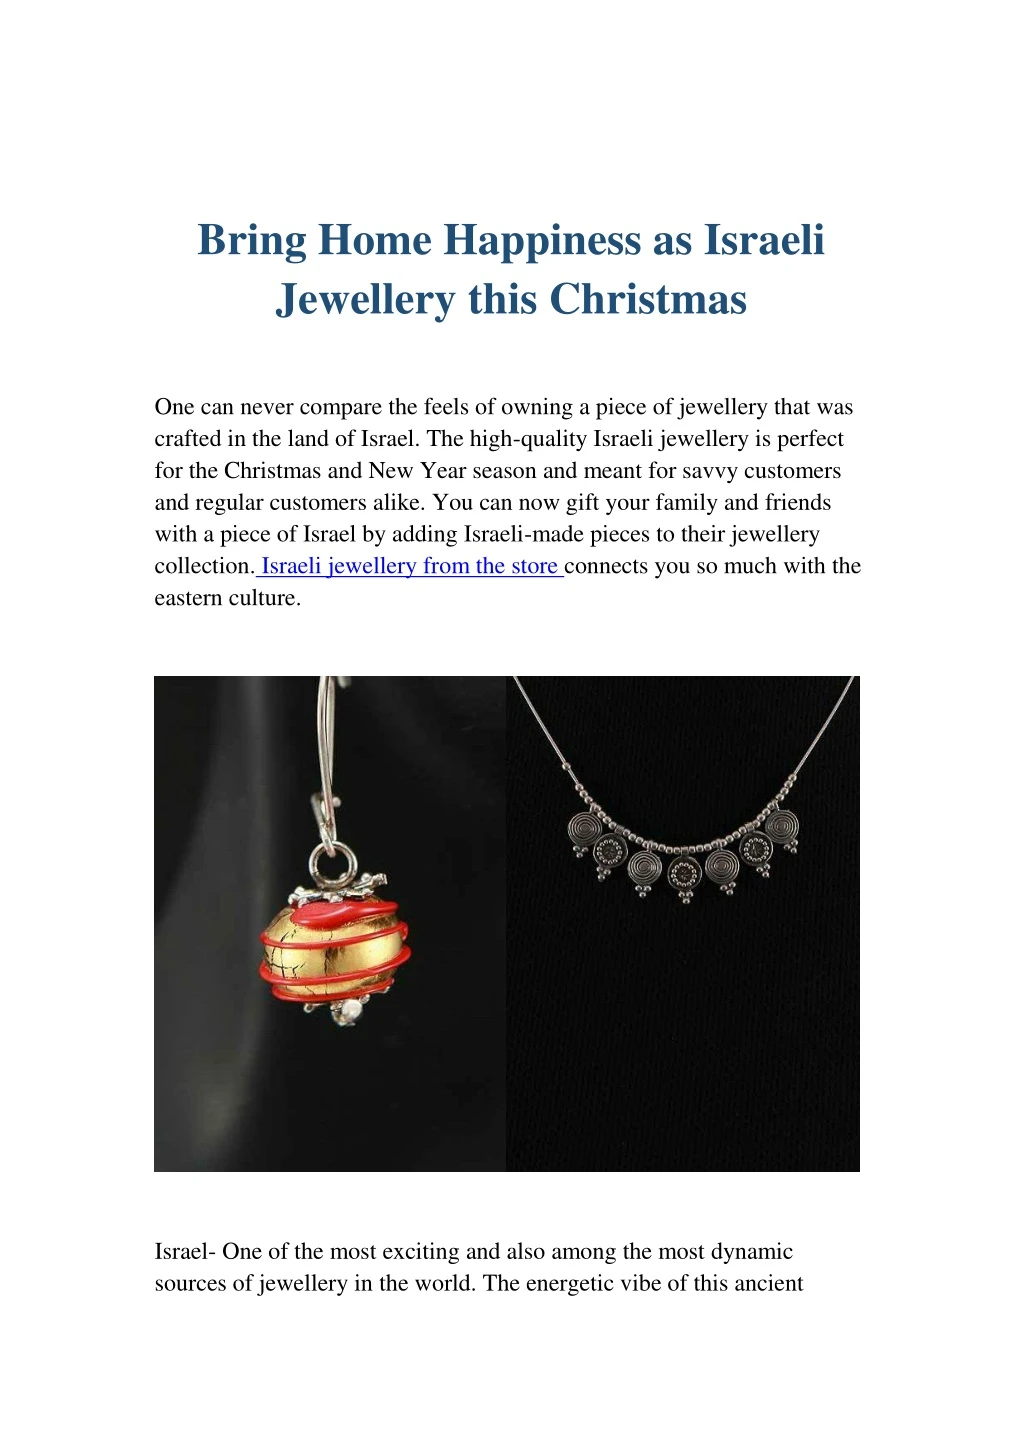 bring home happiness as israeli jewellery this